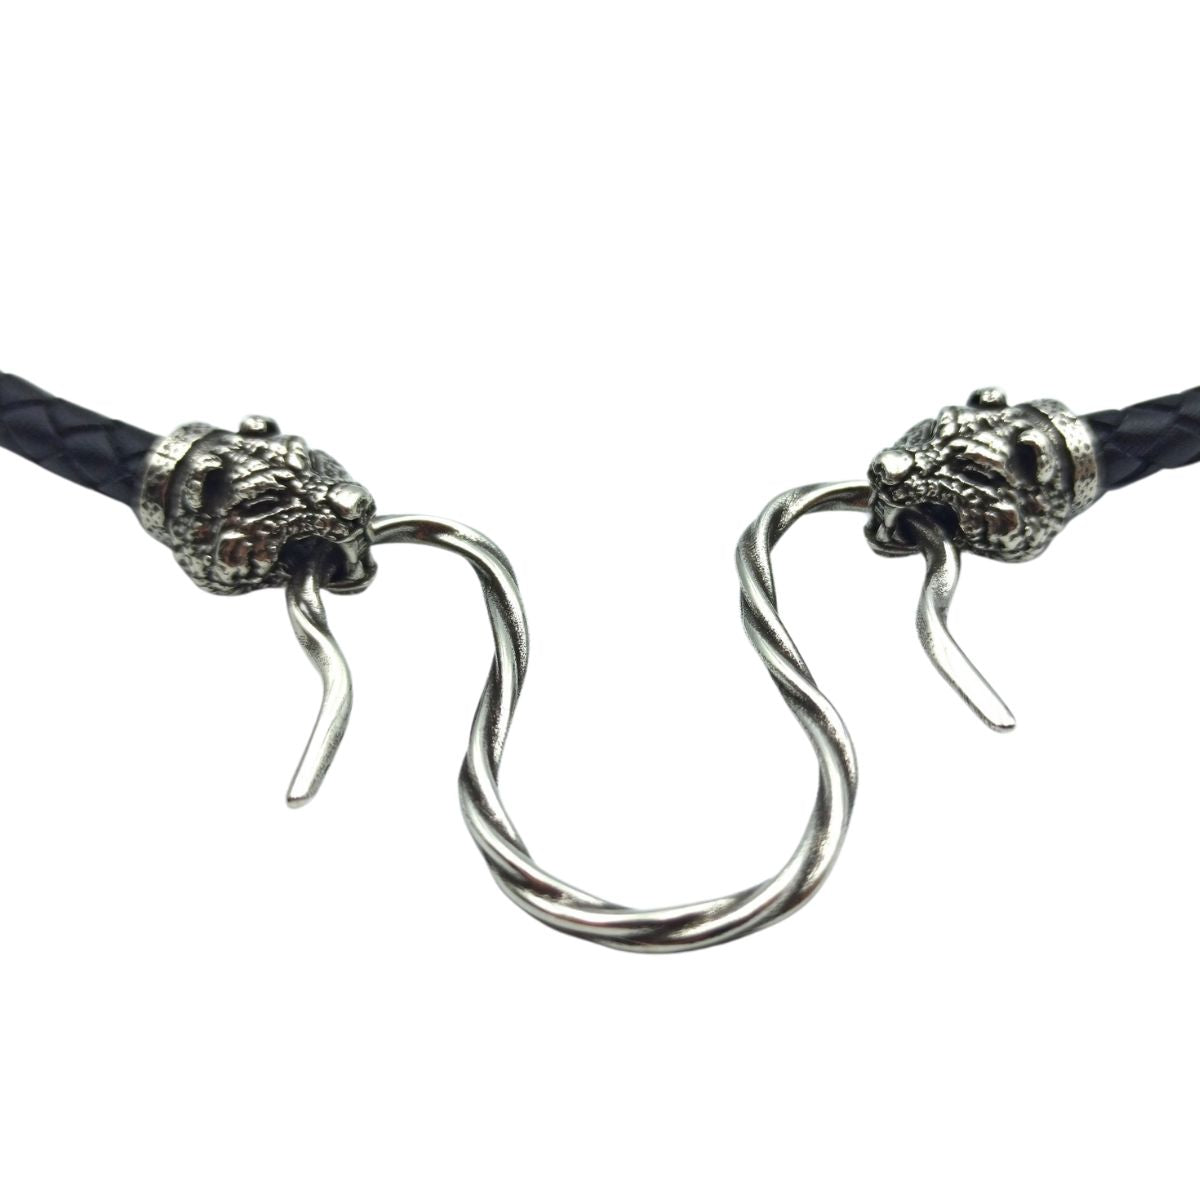 Bear head leather necklace | Silver clasps   